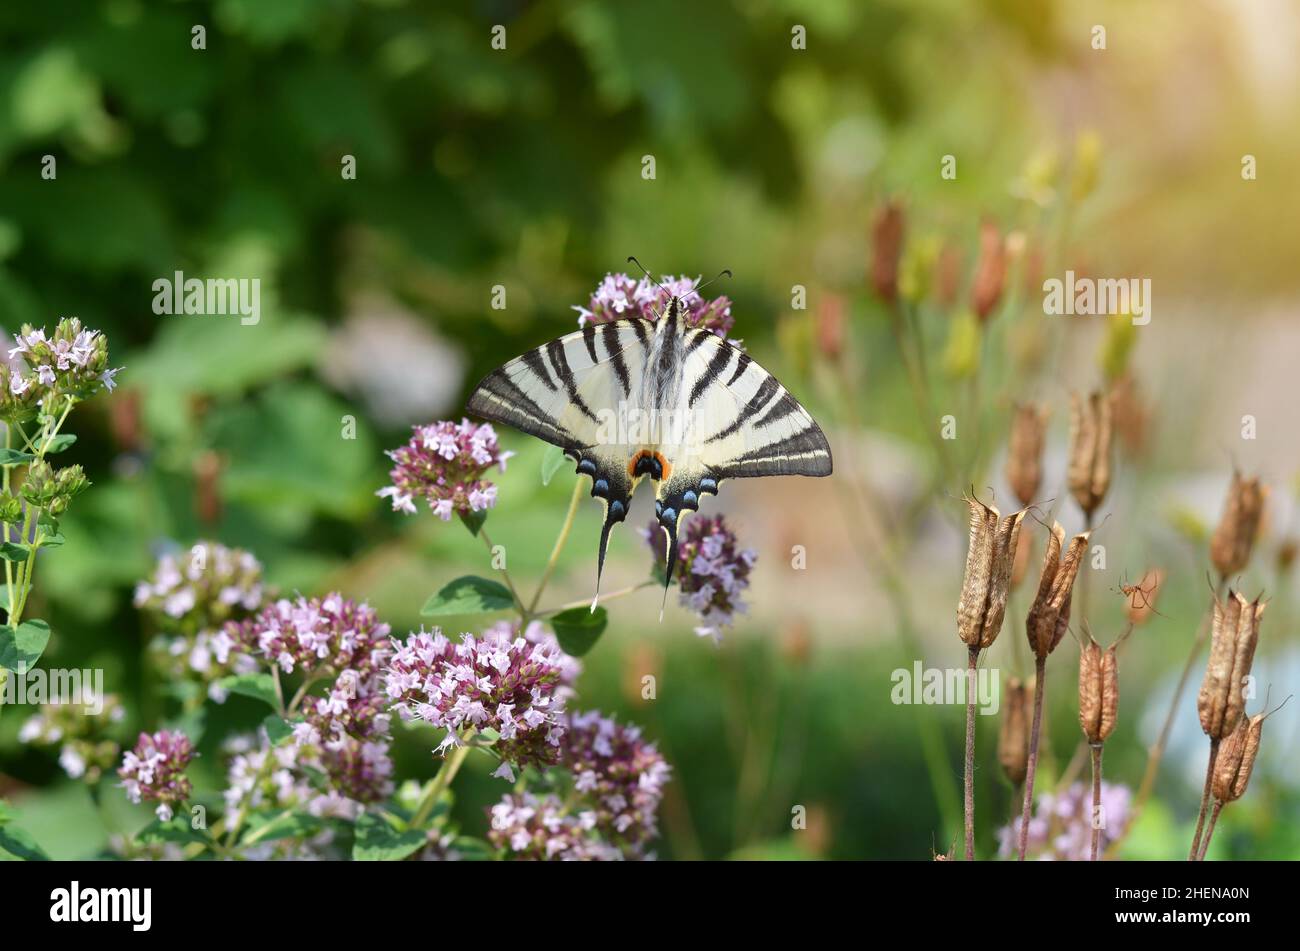 Large scarce swallowtail butterfly in its natural habitat. It is considered rare and endangered and is protected in some European countries. Stock Photo